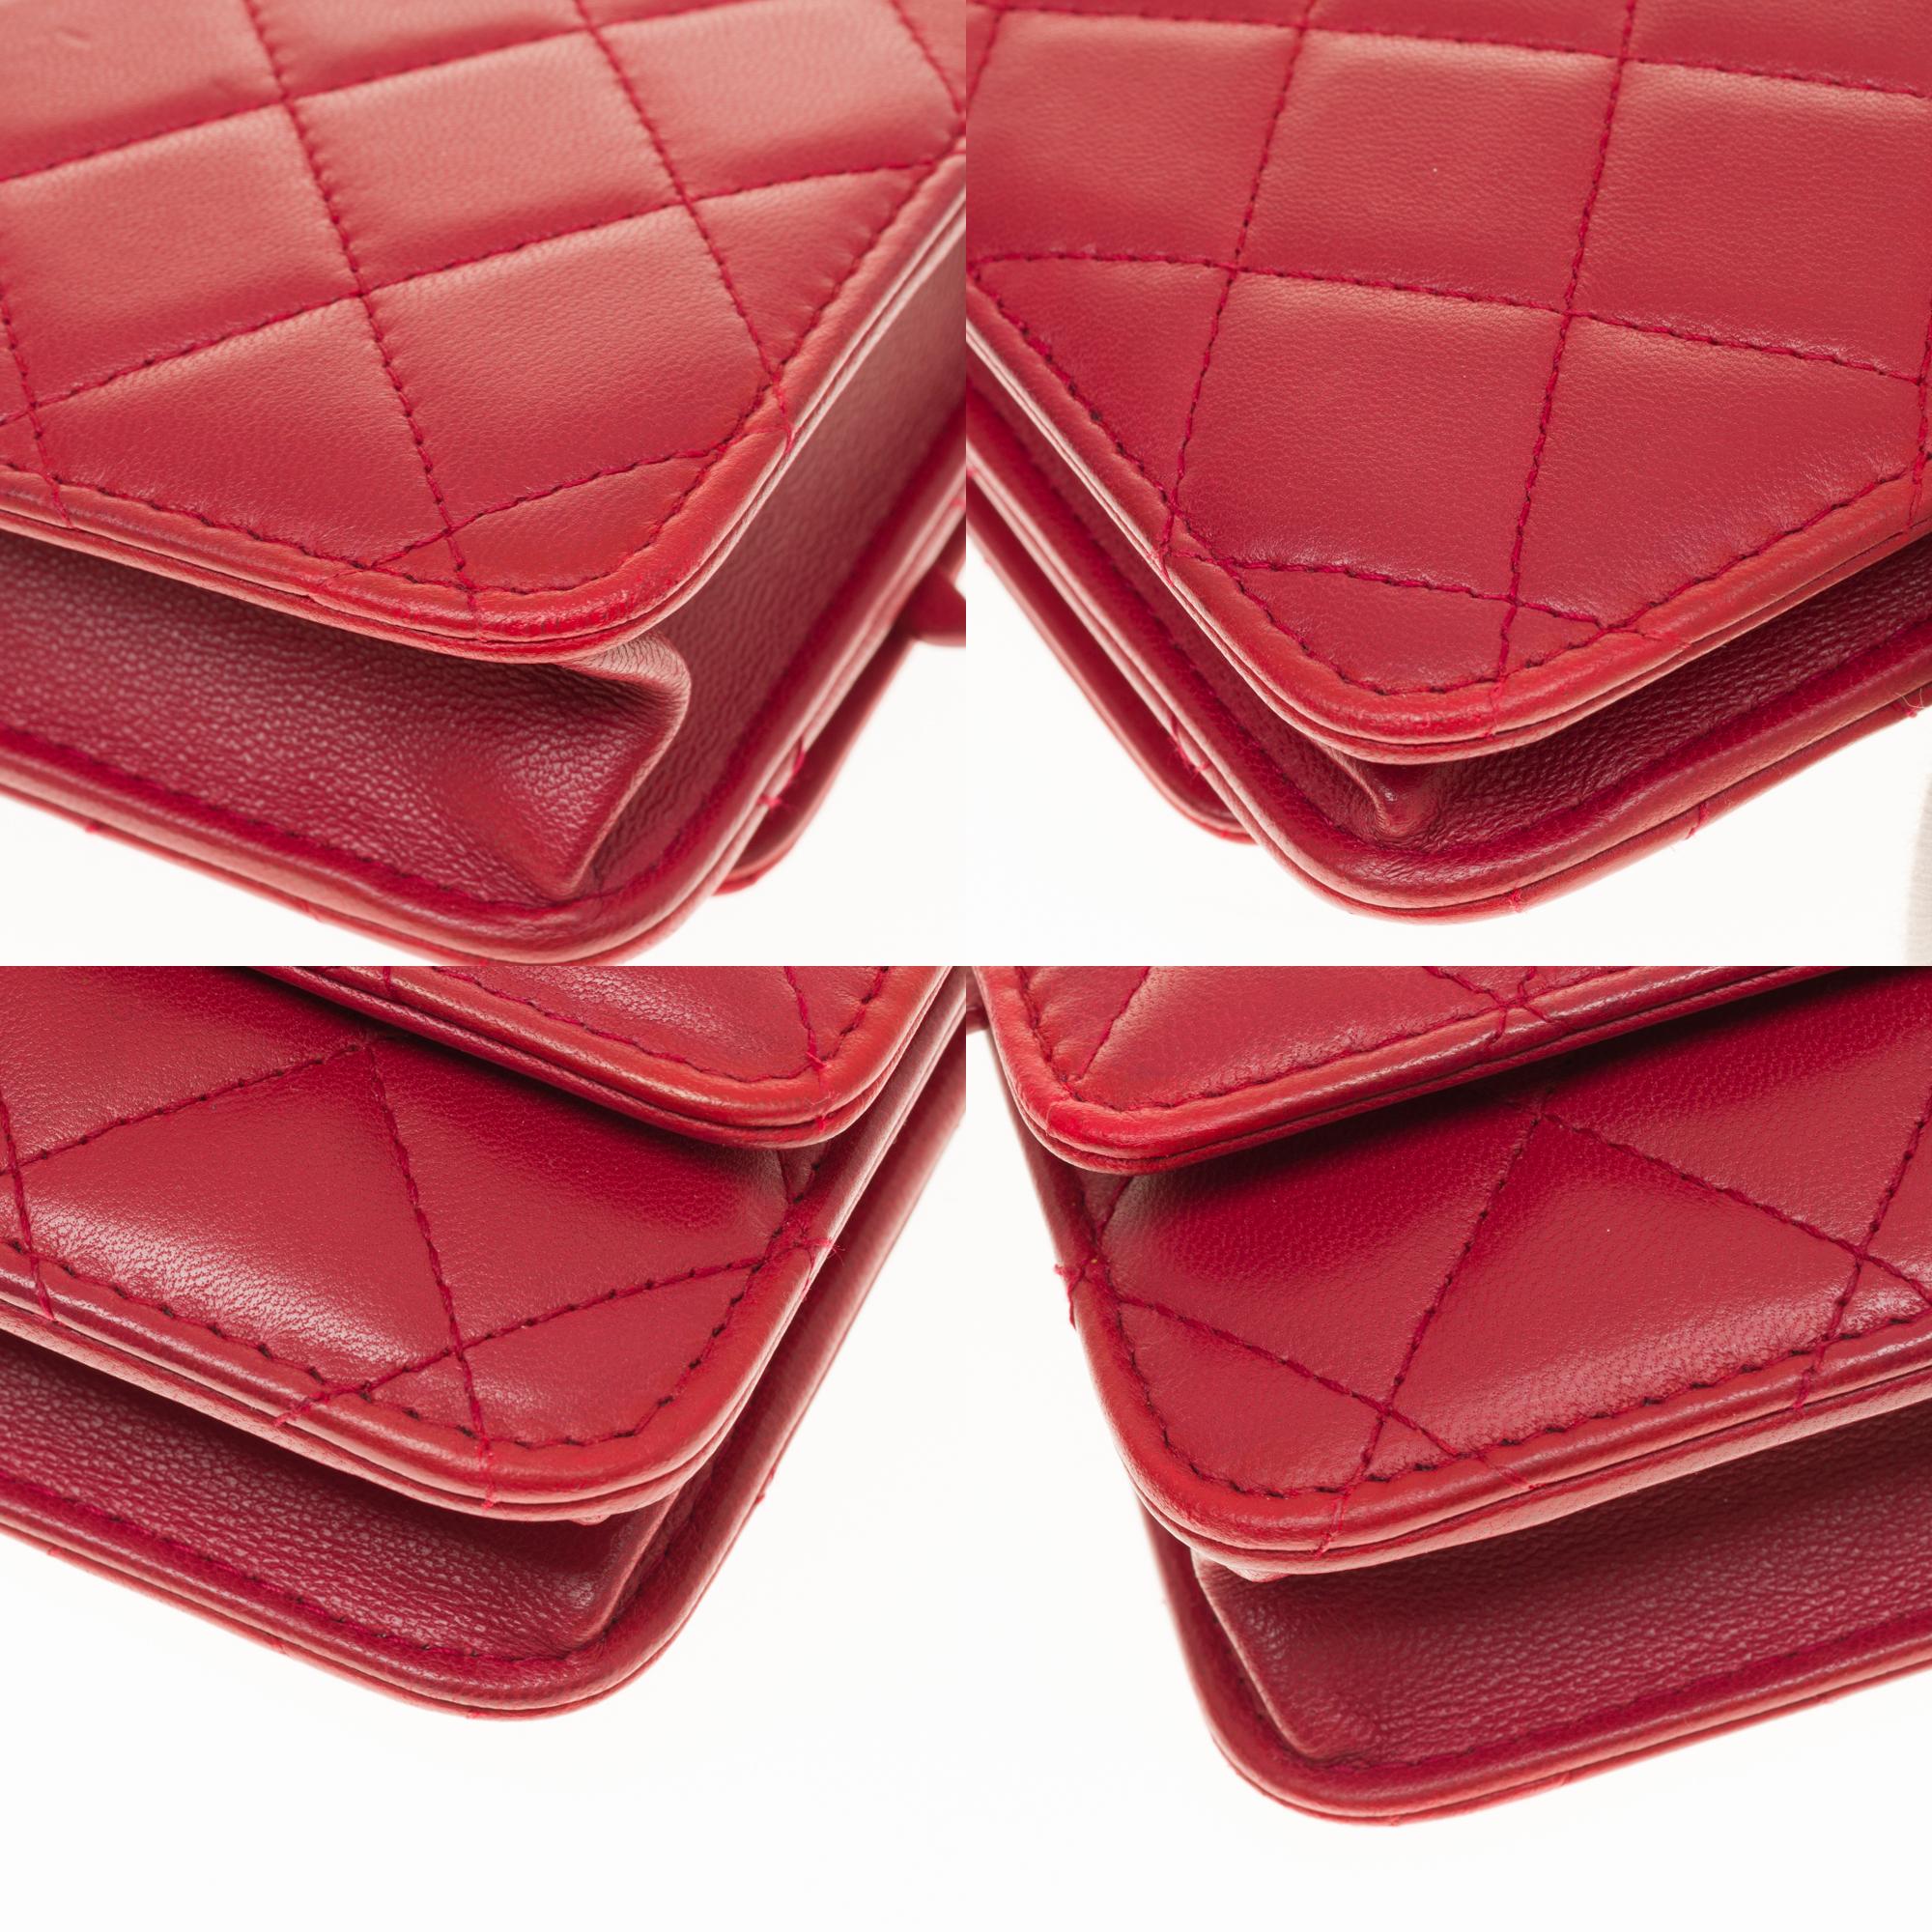 Fancy Chanel Wallet on Chain (WOC)  shoulder bag in red quilted leather, GHW 4